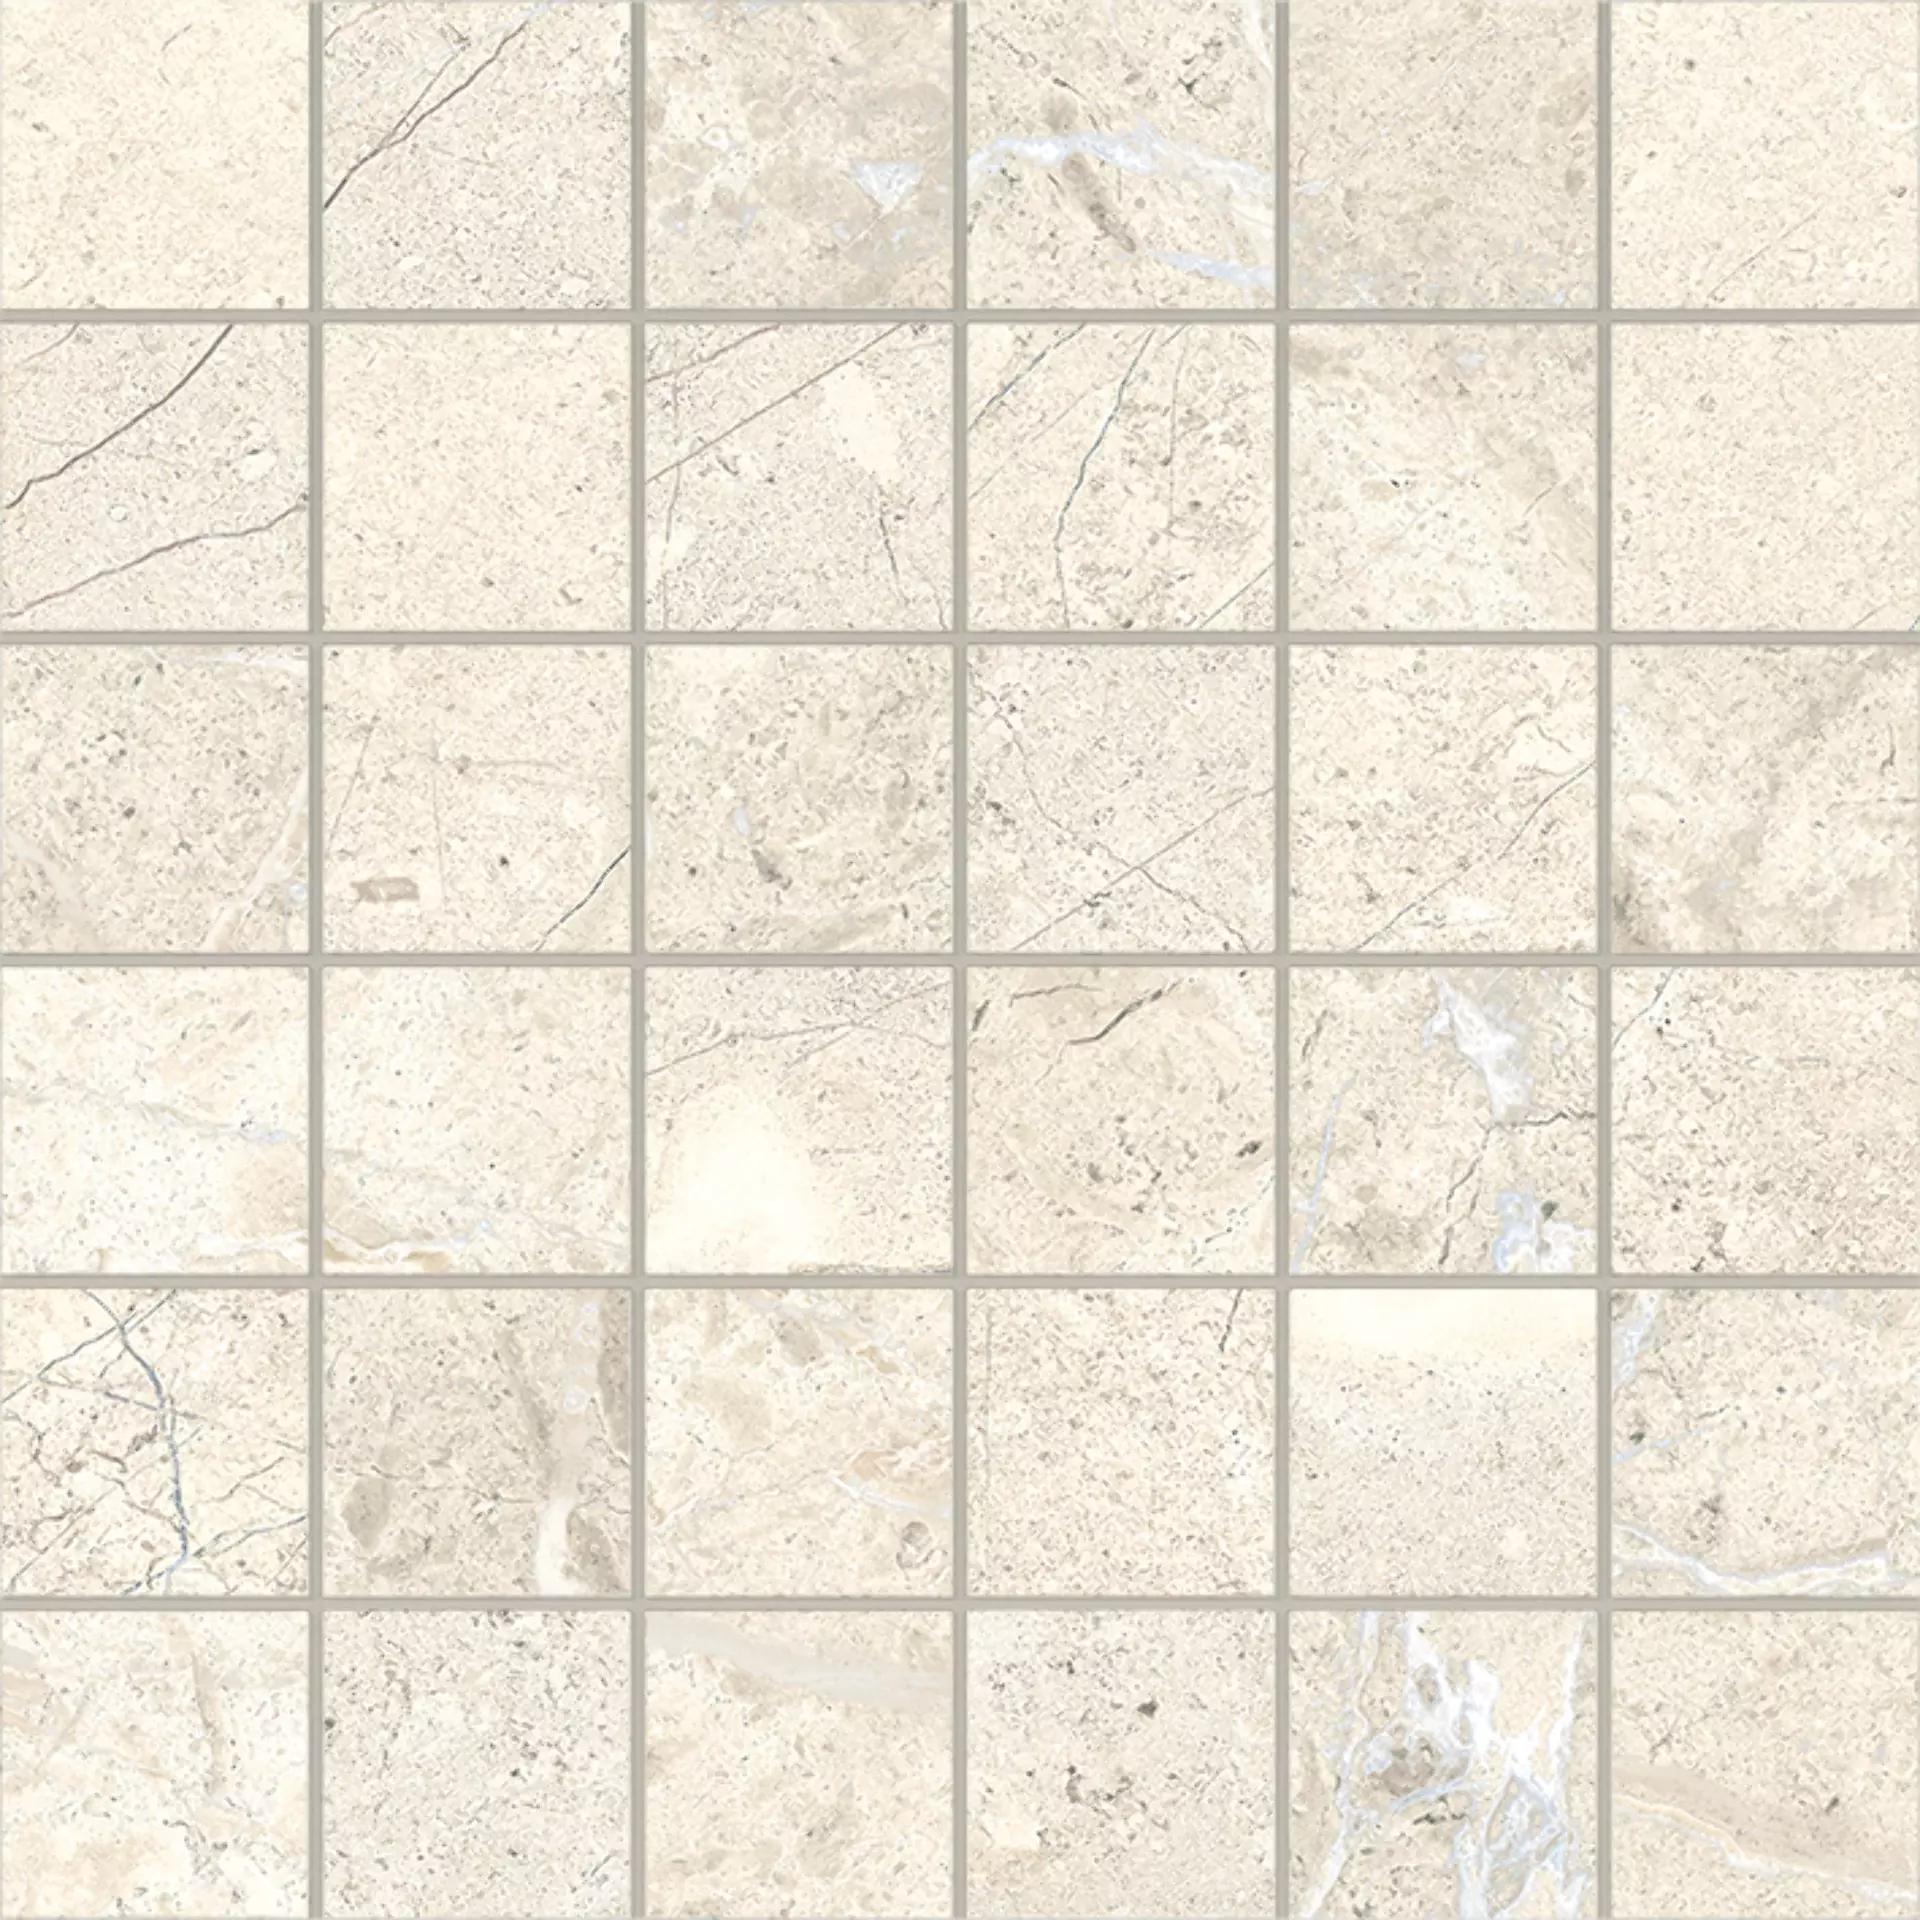 Lea Anthology 01 White Naturale – Antibacterial Mosaic 36 LGCAL01 30x30cm rectified 9,5mm